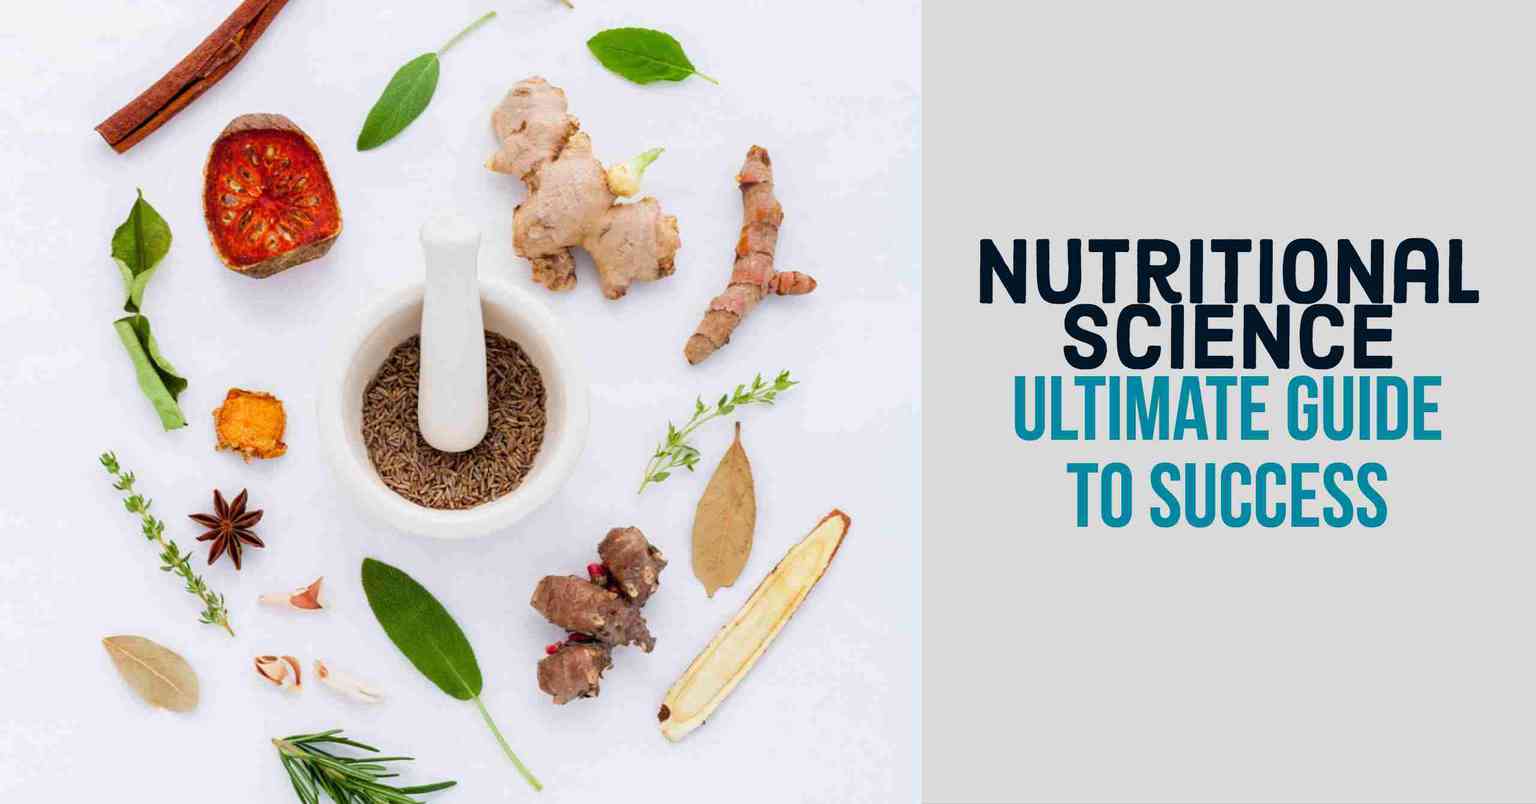 Nutritional science Course Overview